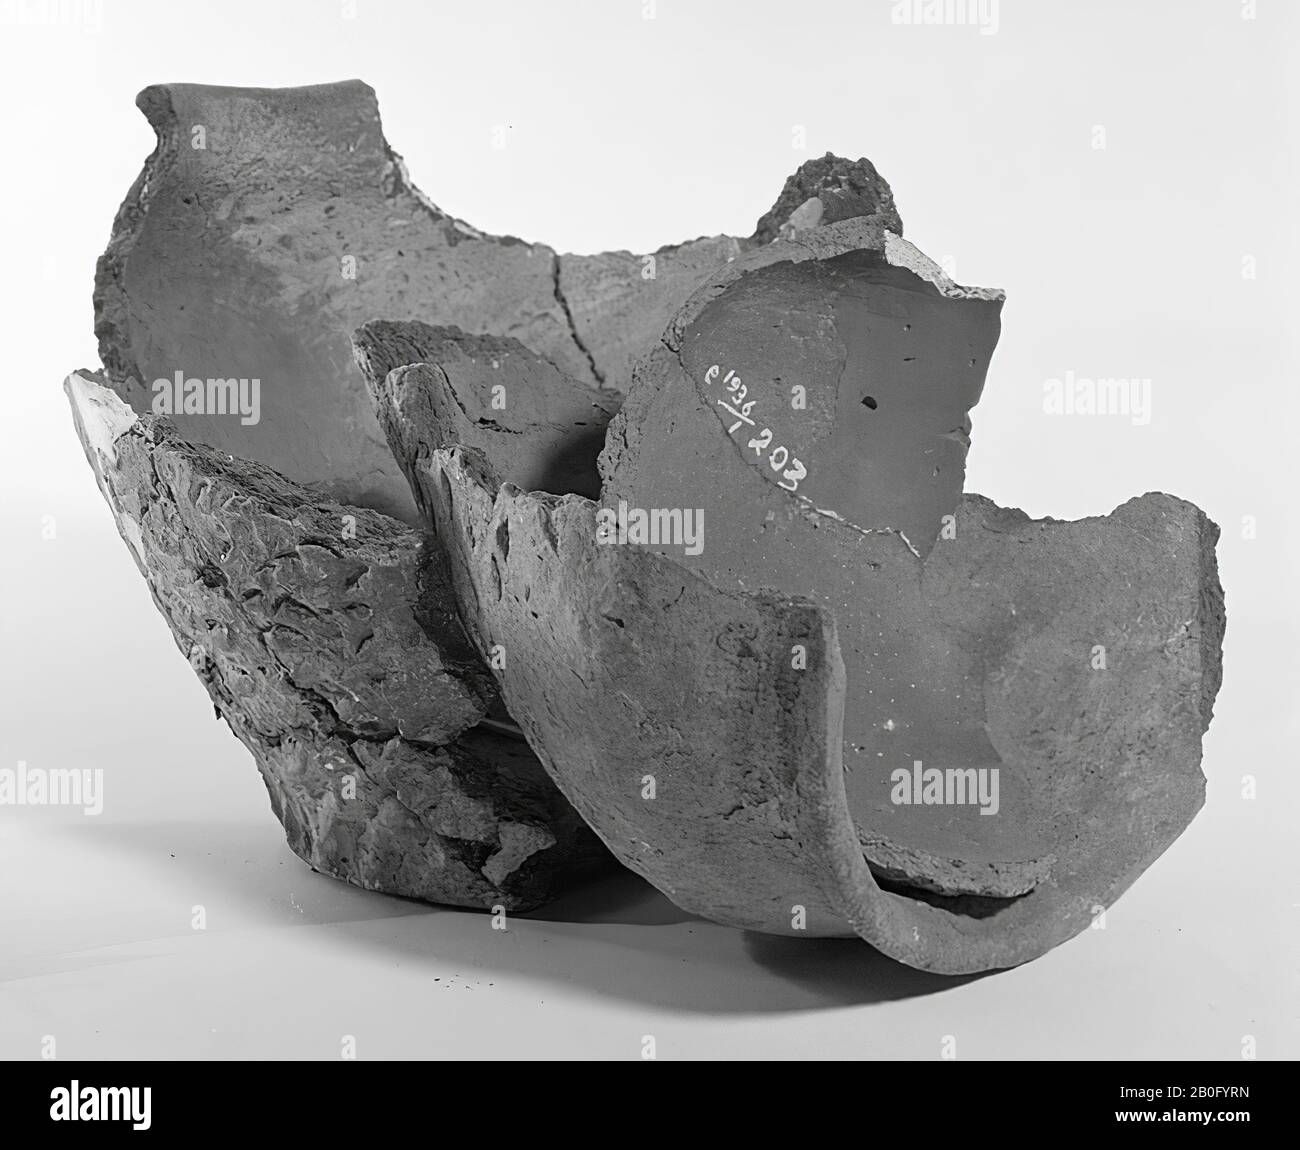 Lower part of a small urn of earthenware, decorated on the lower half with deep nail impressions, so that the surface is covered by regular irregularities. La Tène probably. Old bonding and supplementing. On 18-2-2008 mold removed., Urn, fragment, pottery, h: 7.1 cm, diam: 10.6 cm, prehistory -1200 Stock Photo